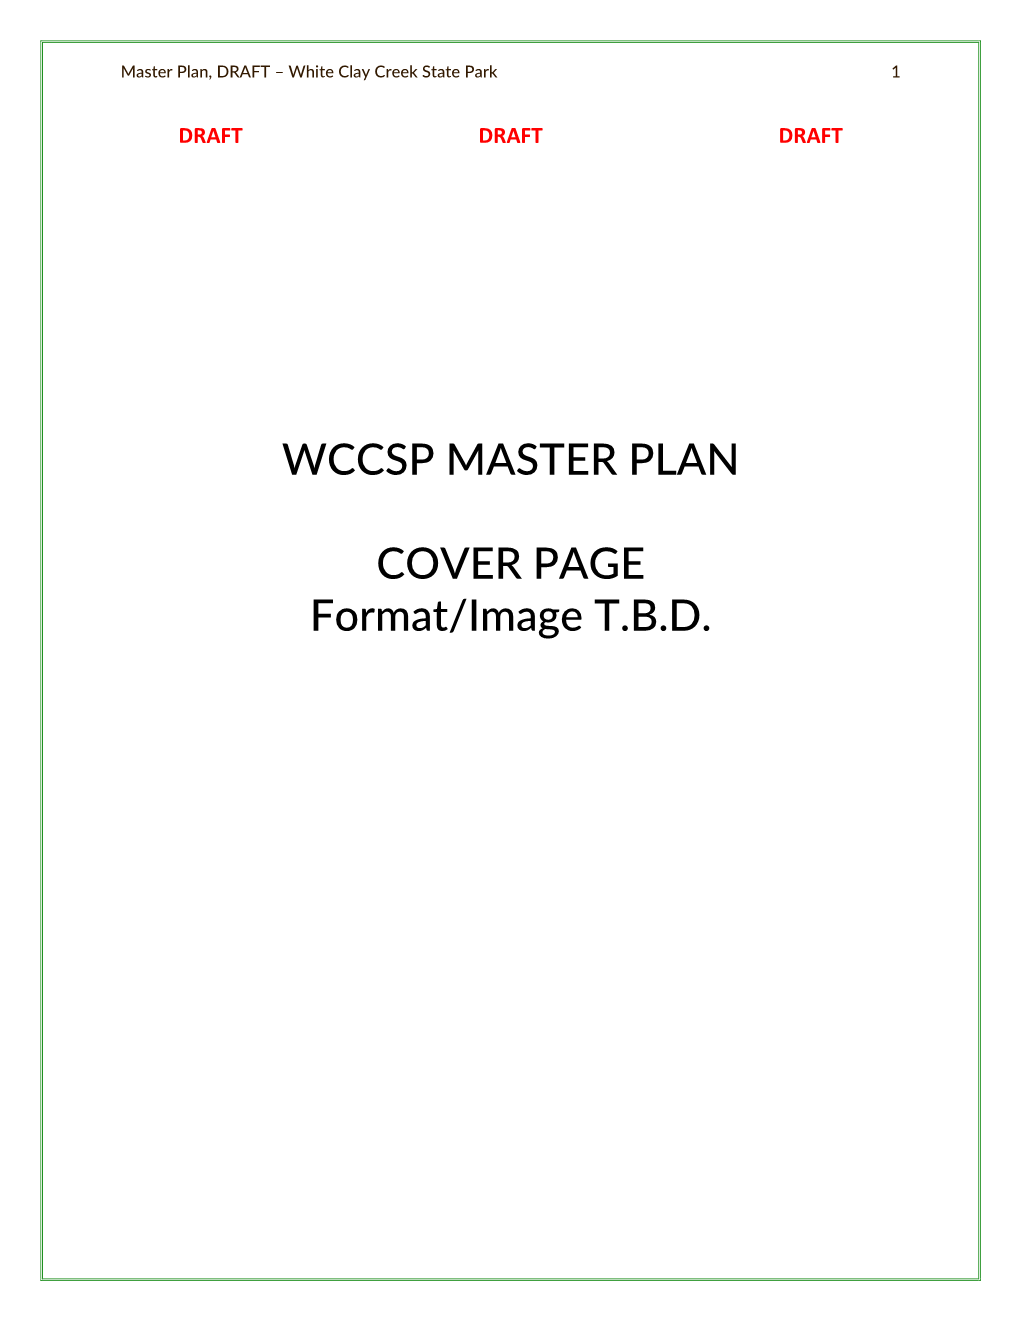 WCCSP MASTER PLAN COVER PAGE Format/Image T.B.D